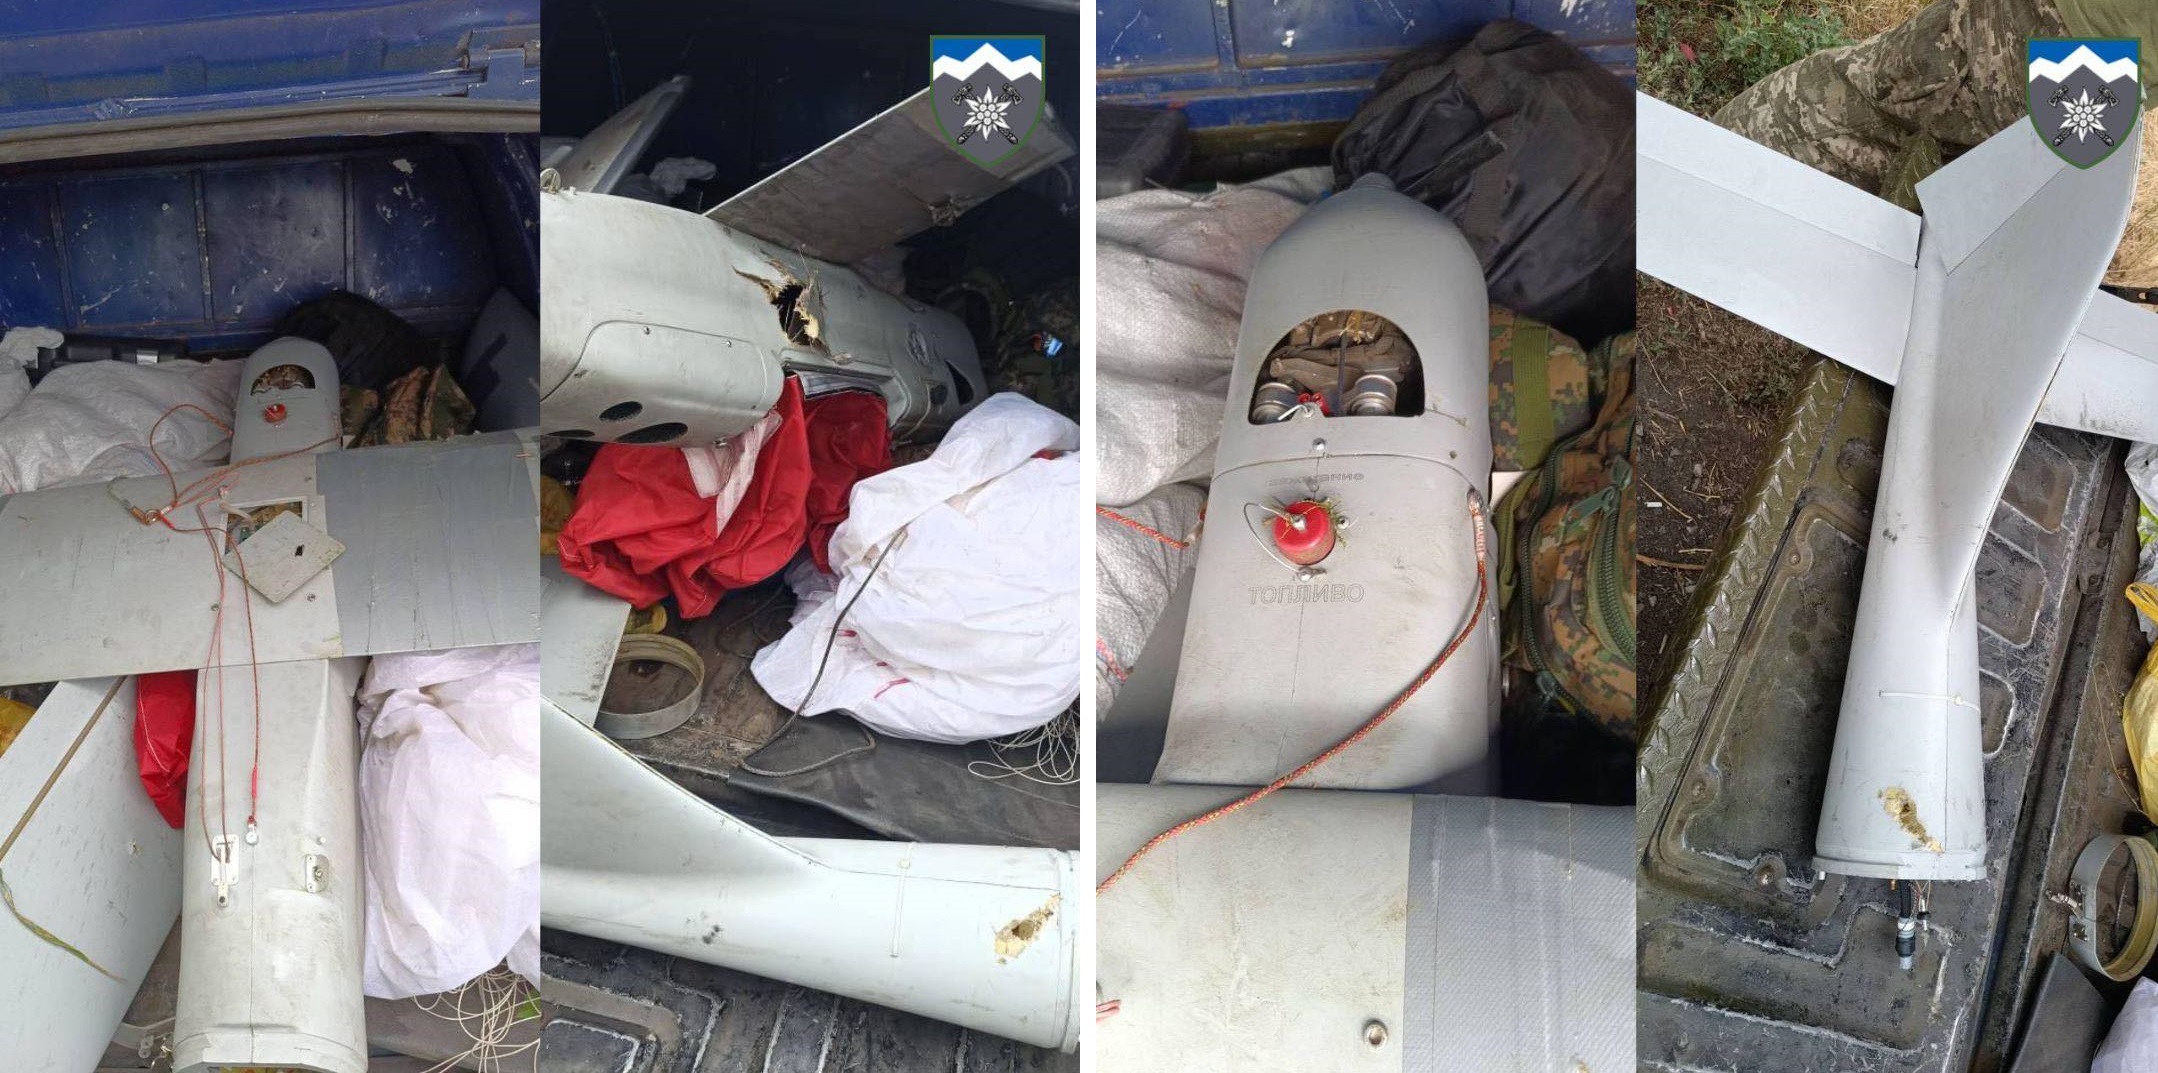 Warriors of the Armed Forces of Ukraine shot down a Russian reconnaissance drone with a bottle instead of a fuel side